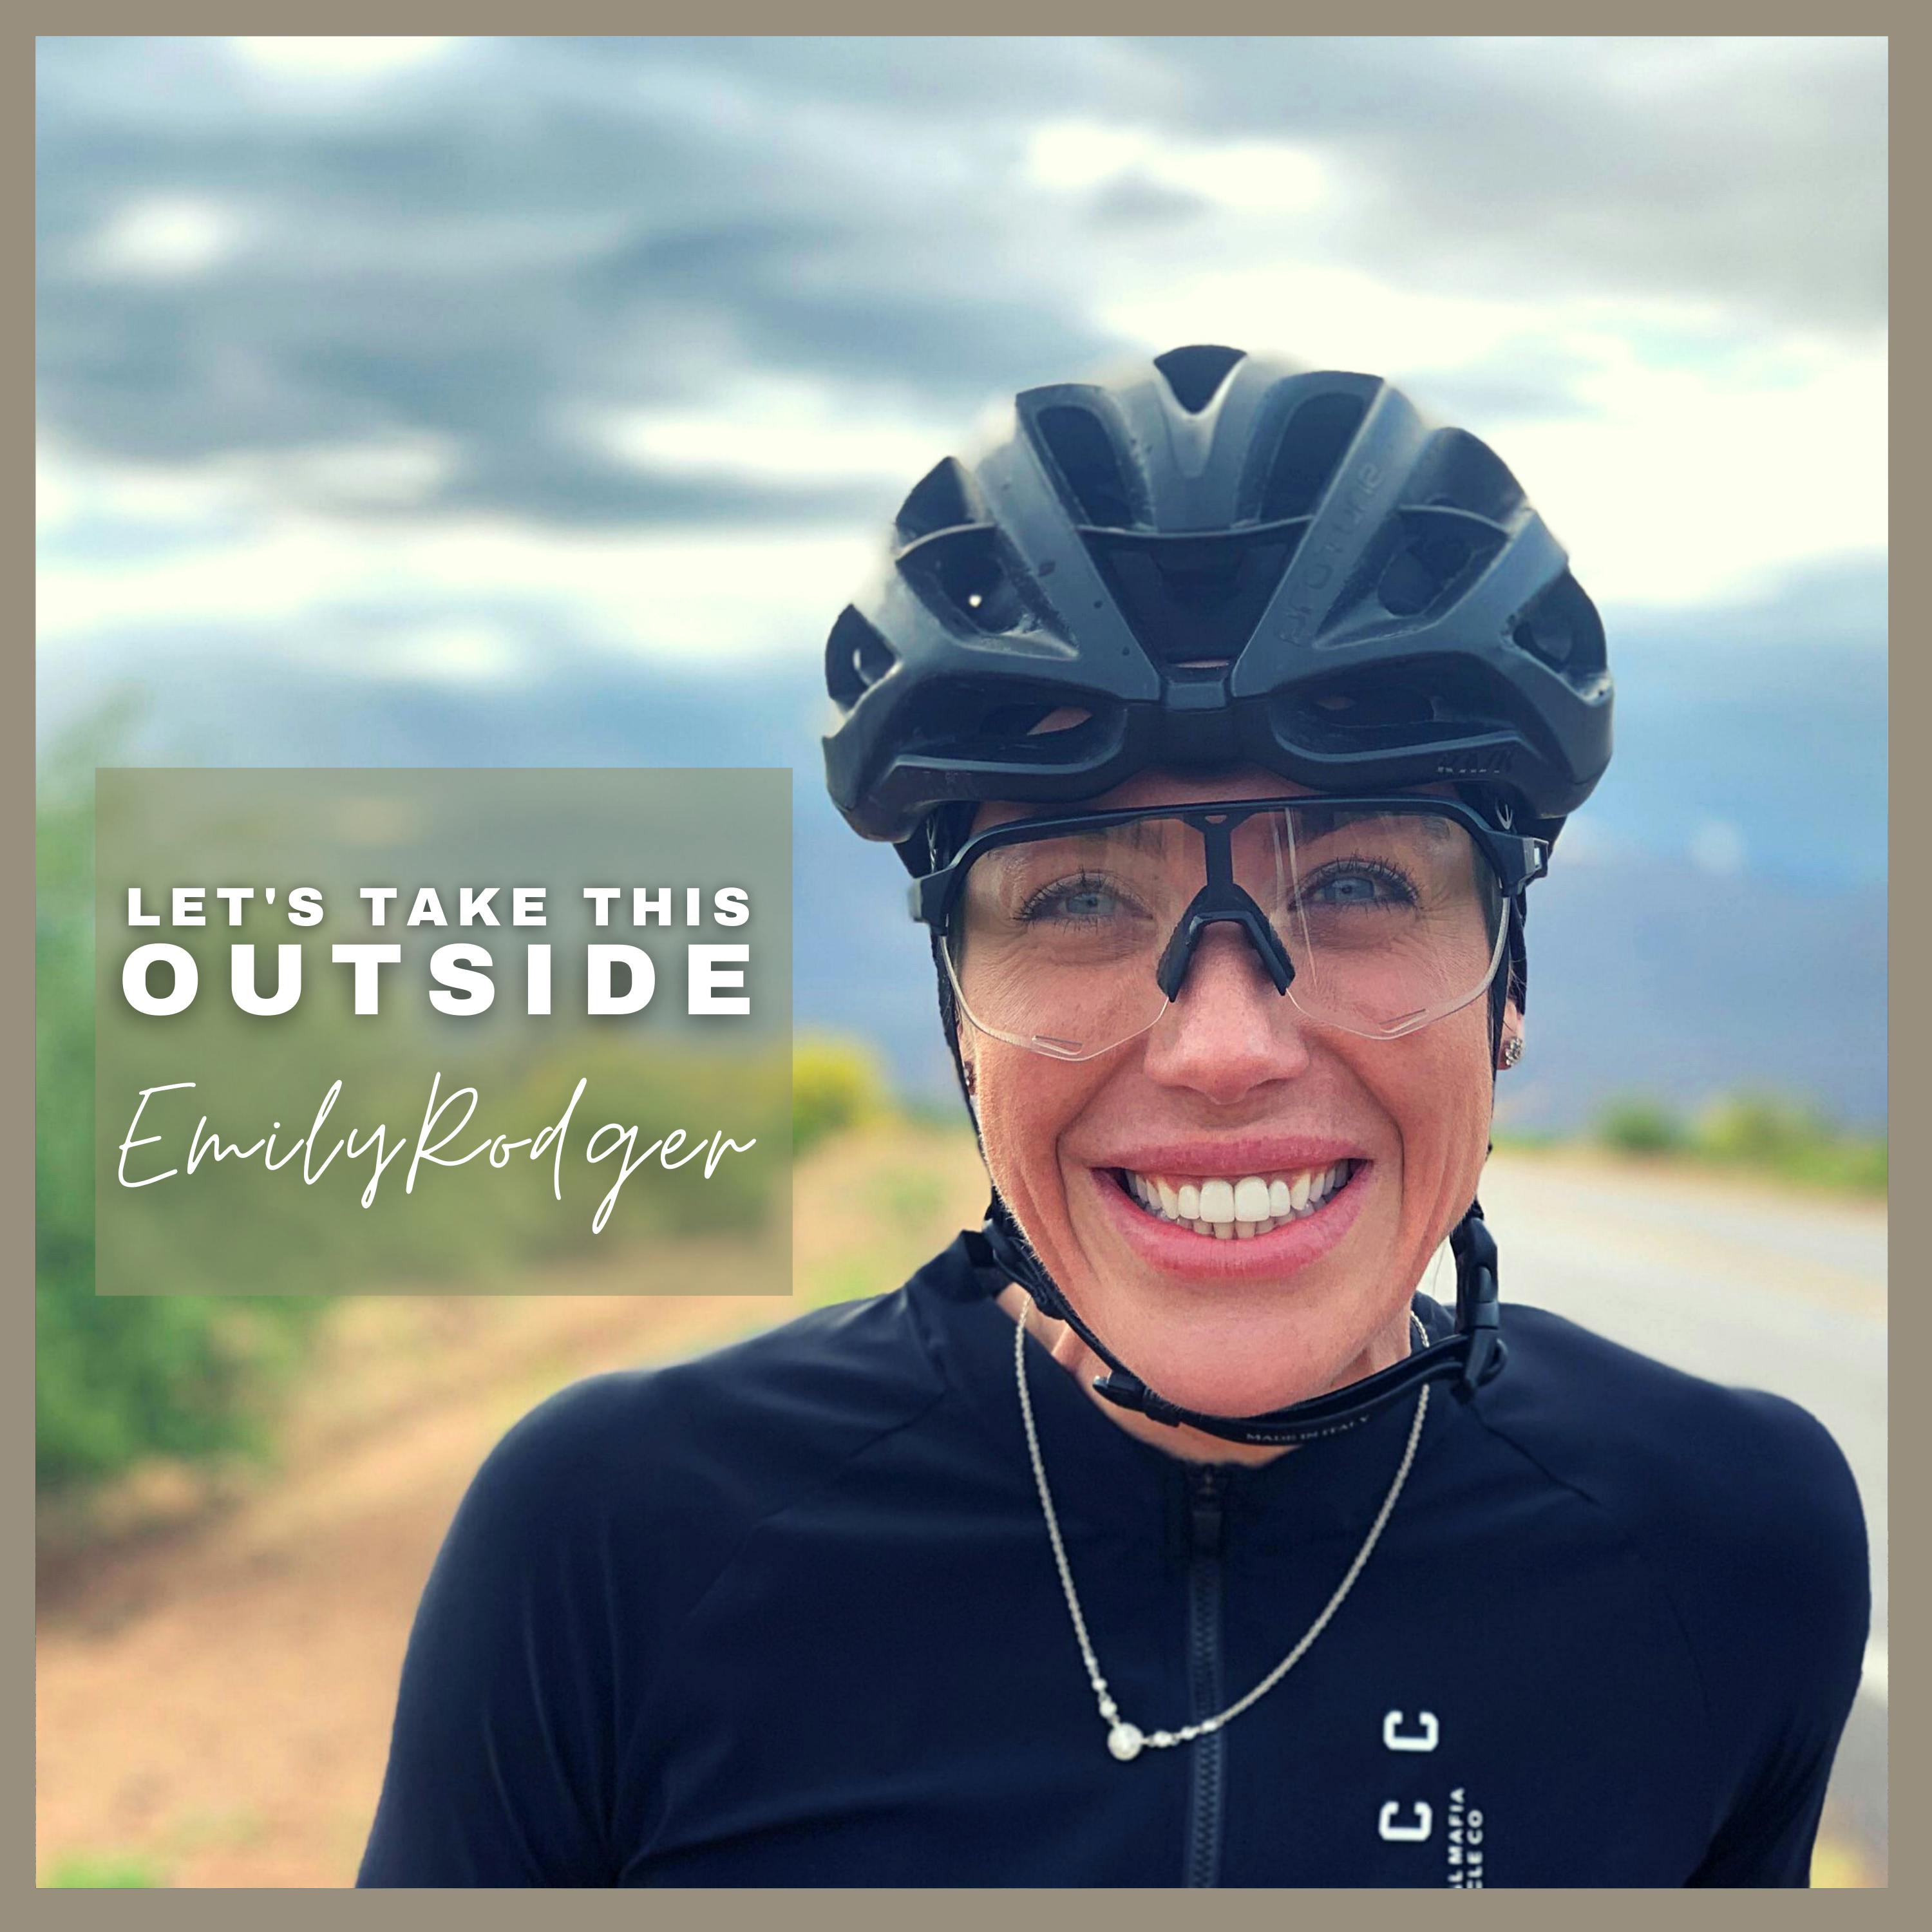 Emily Rodger - Elite Athlete + Lessons On Resilience Image